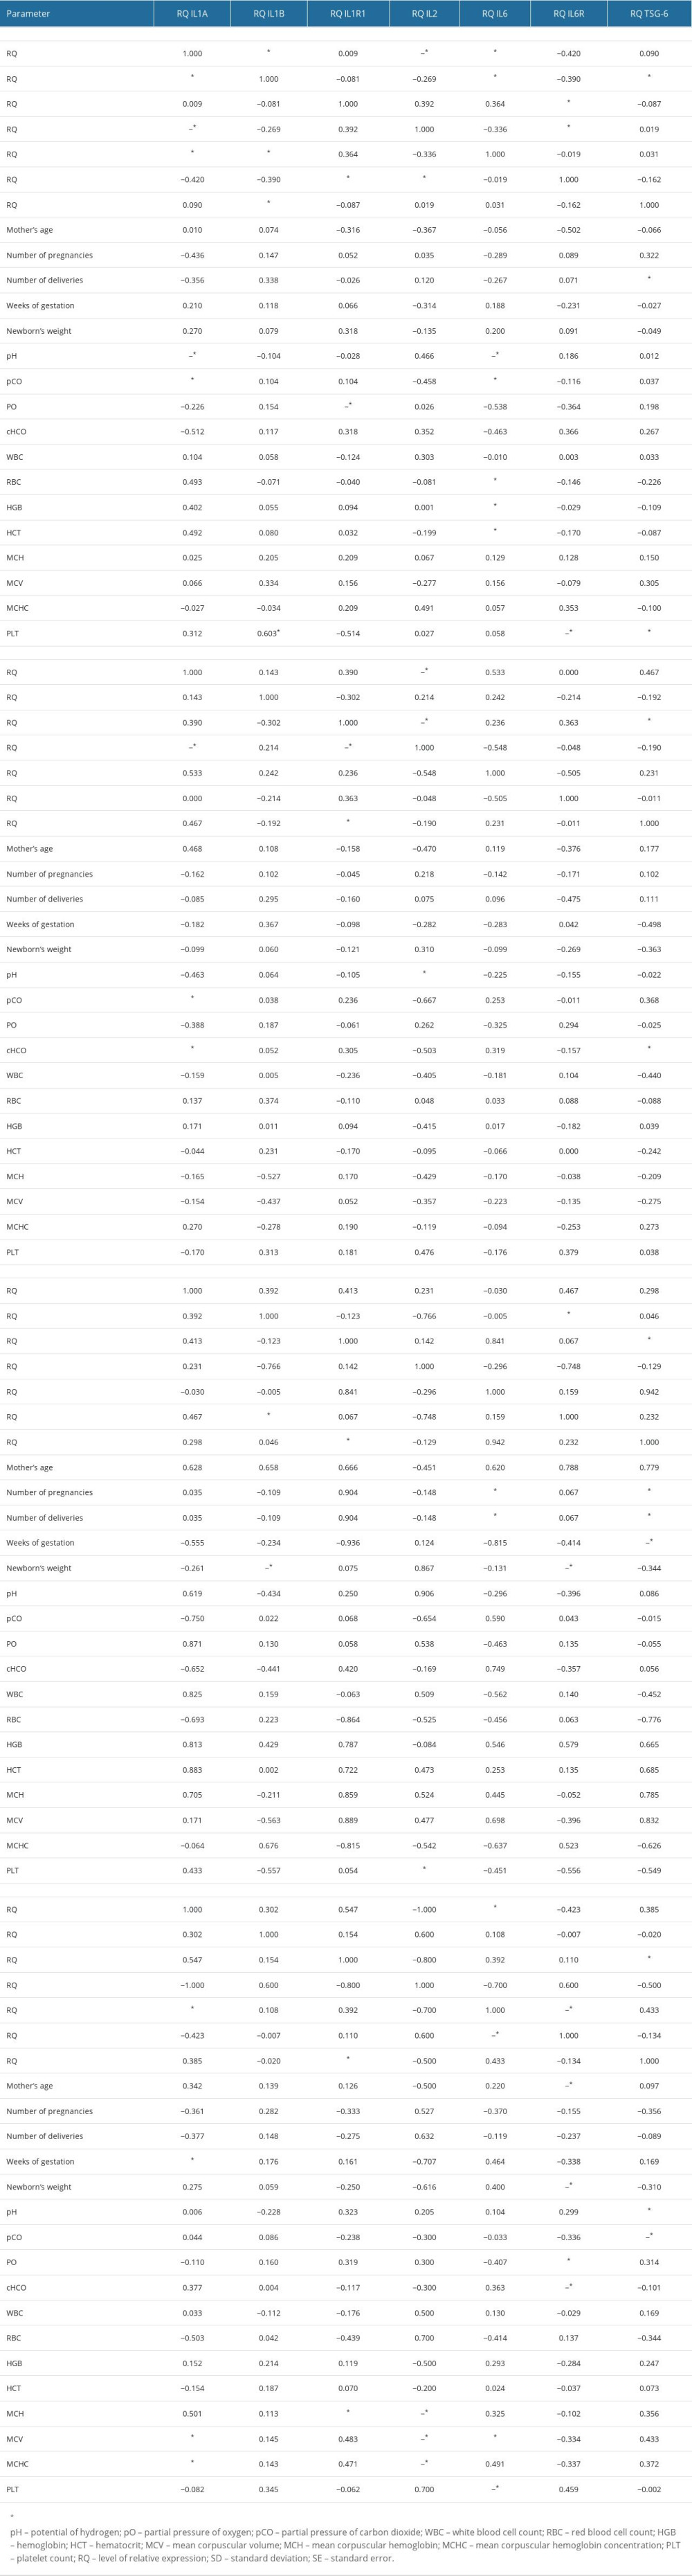 Correlations between clinical parameters and expression of genes in the group of healthy women (n=17), patients with gestational diabetes (n=13), patients with hypertension (n=8), and patients with hypothyroidism (n=14).